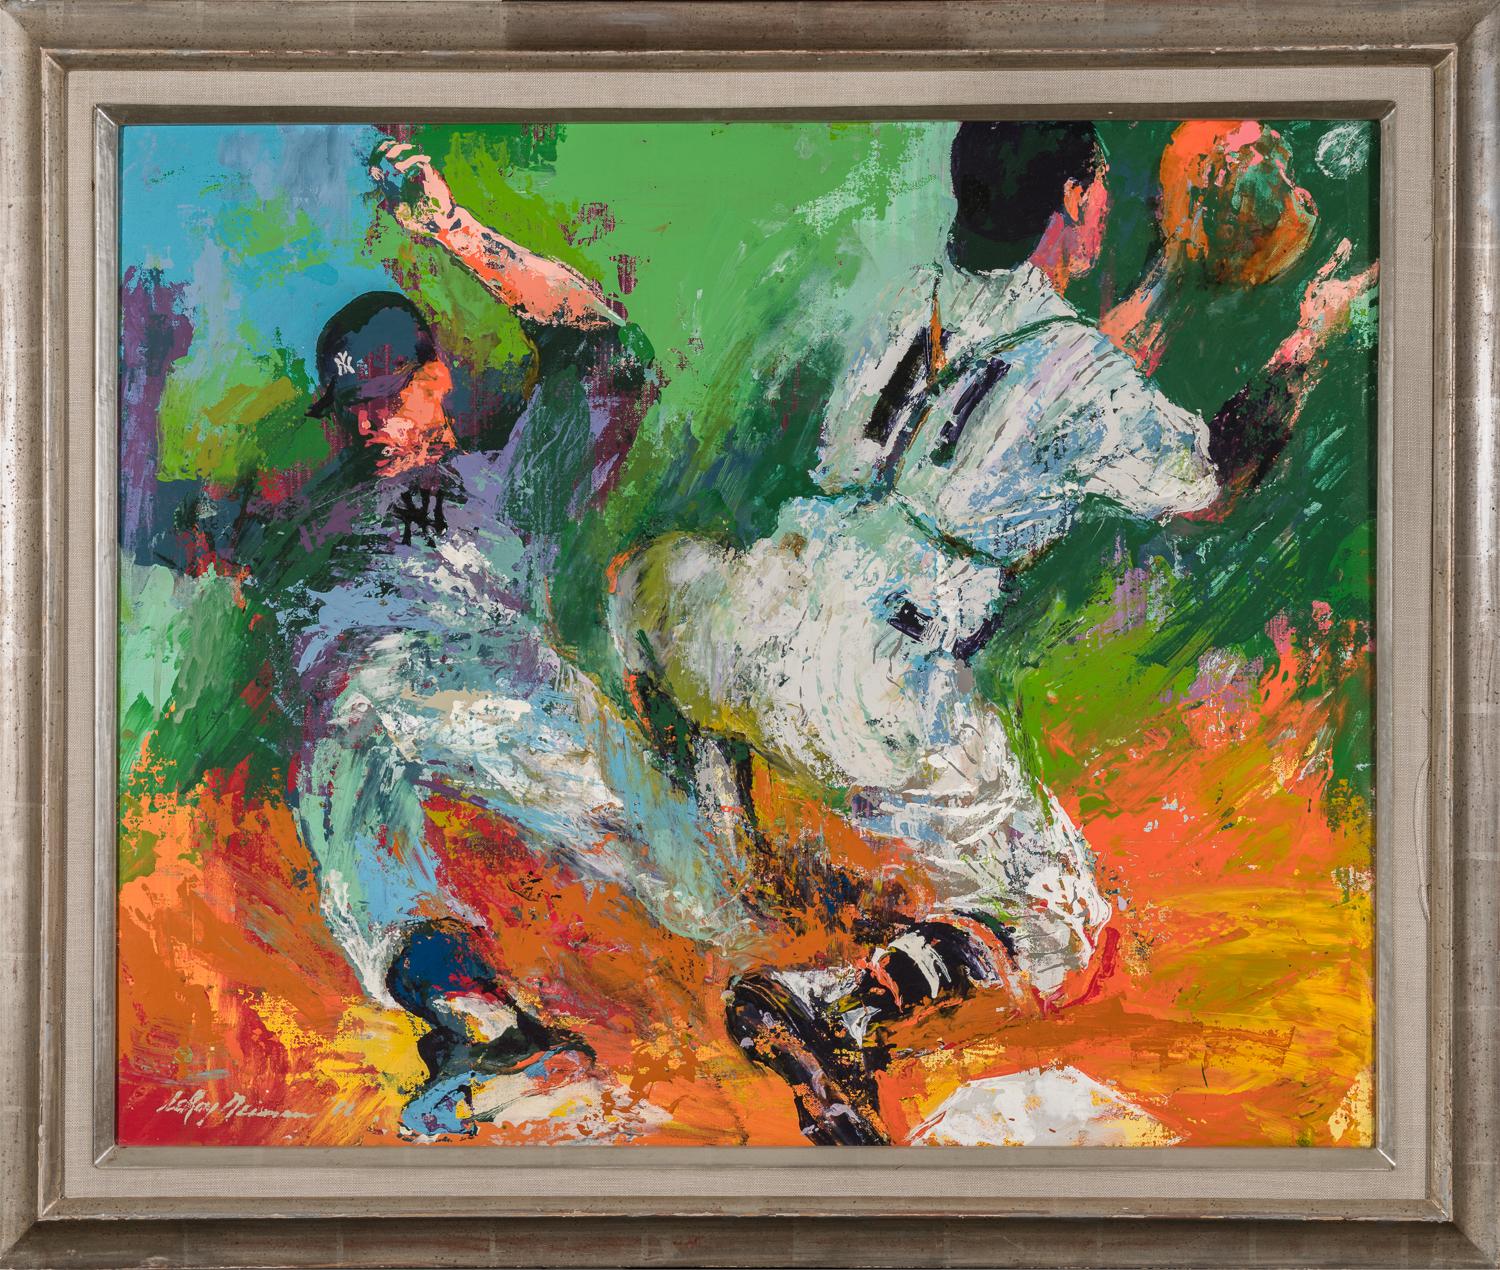 Mantle at Home - Painting by Leroy Neiman